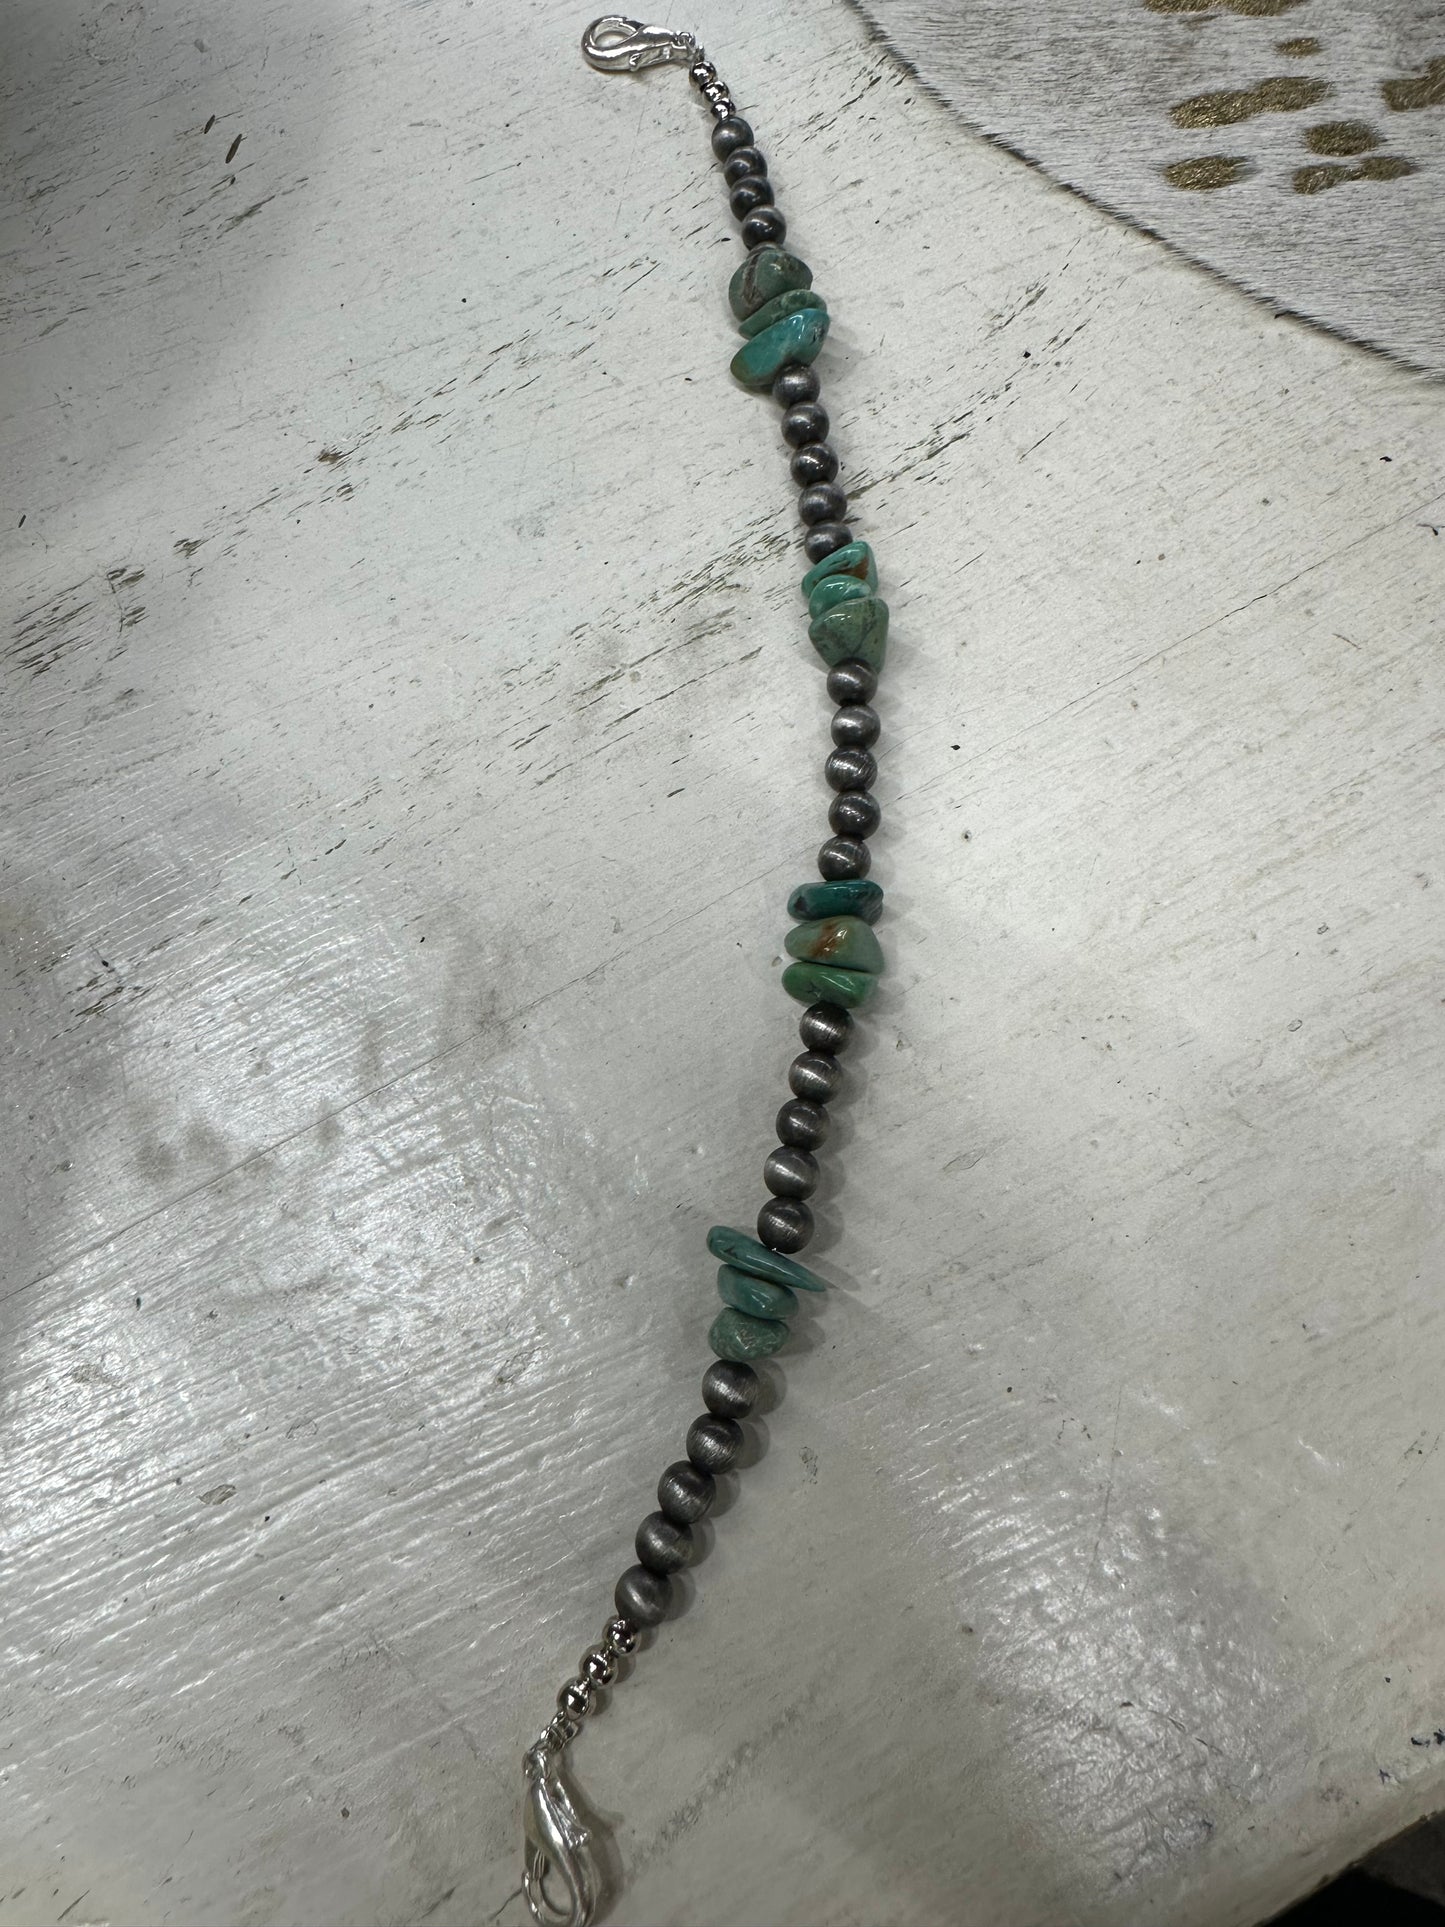 Silver Pearl & Turquoise Chip Cap Jewlery